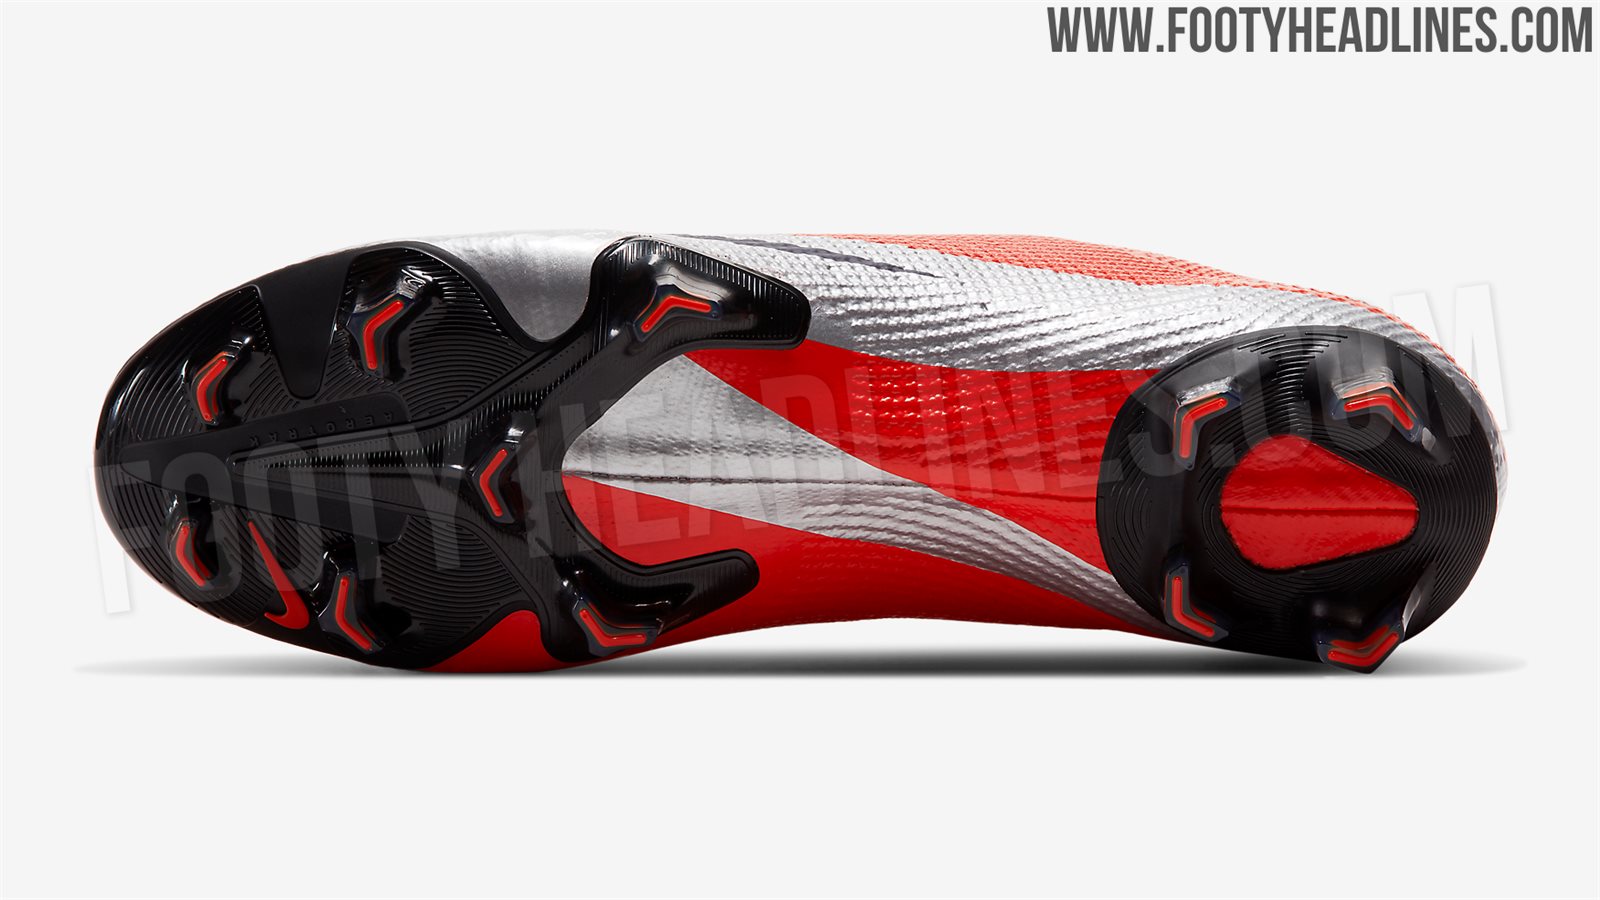 Amazing Nike Mercurial Vapor 'Future DNA' Boots Released - Worn By ...